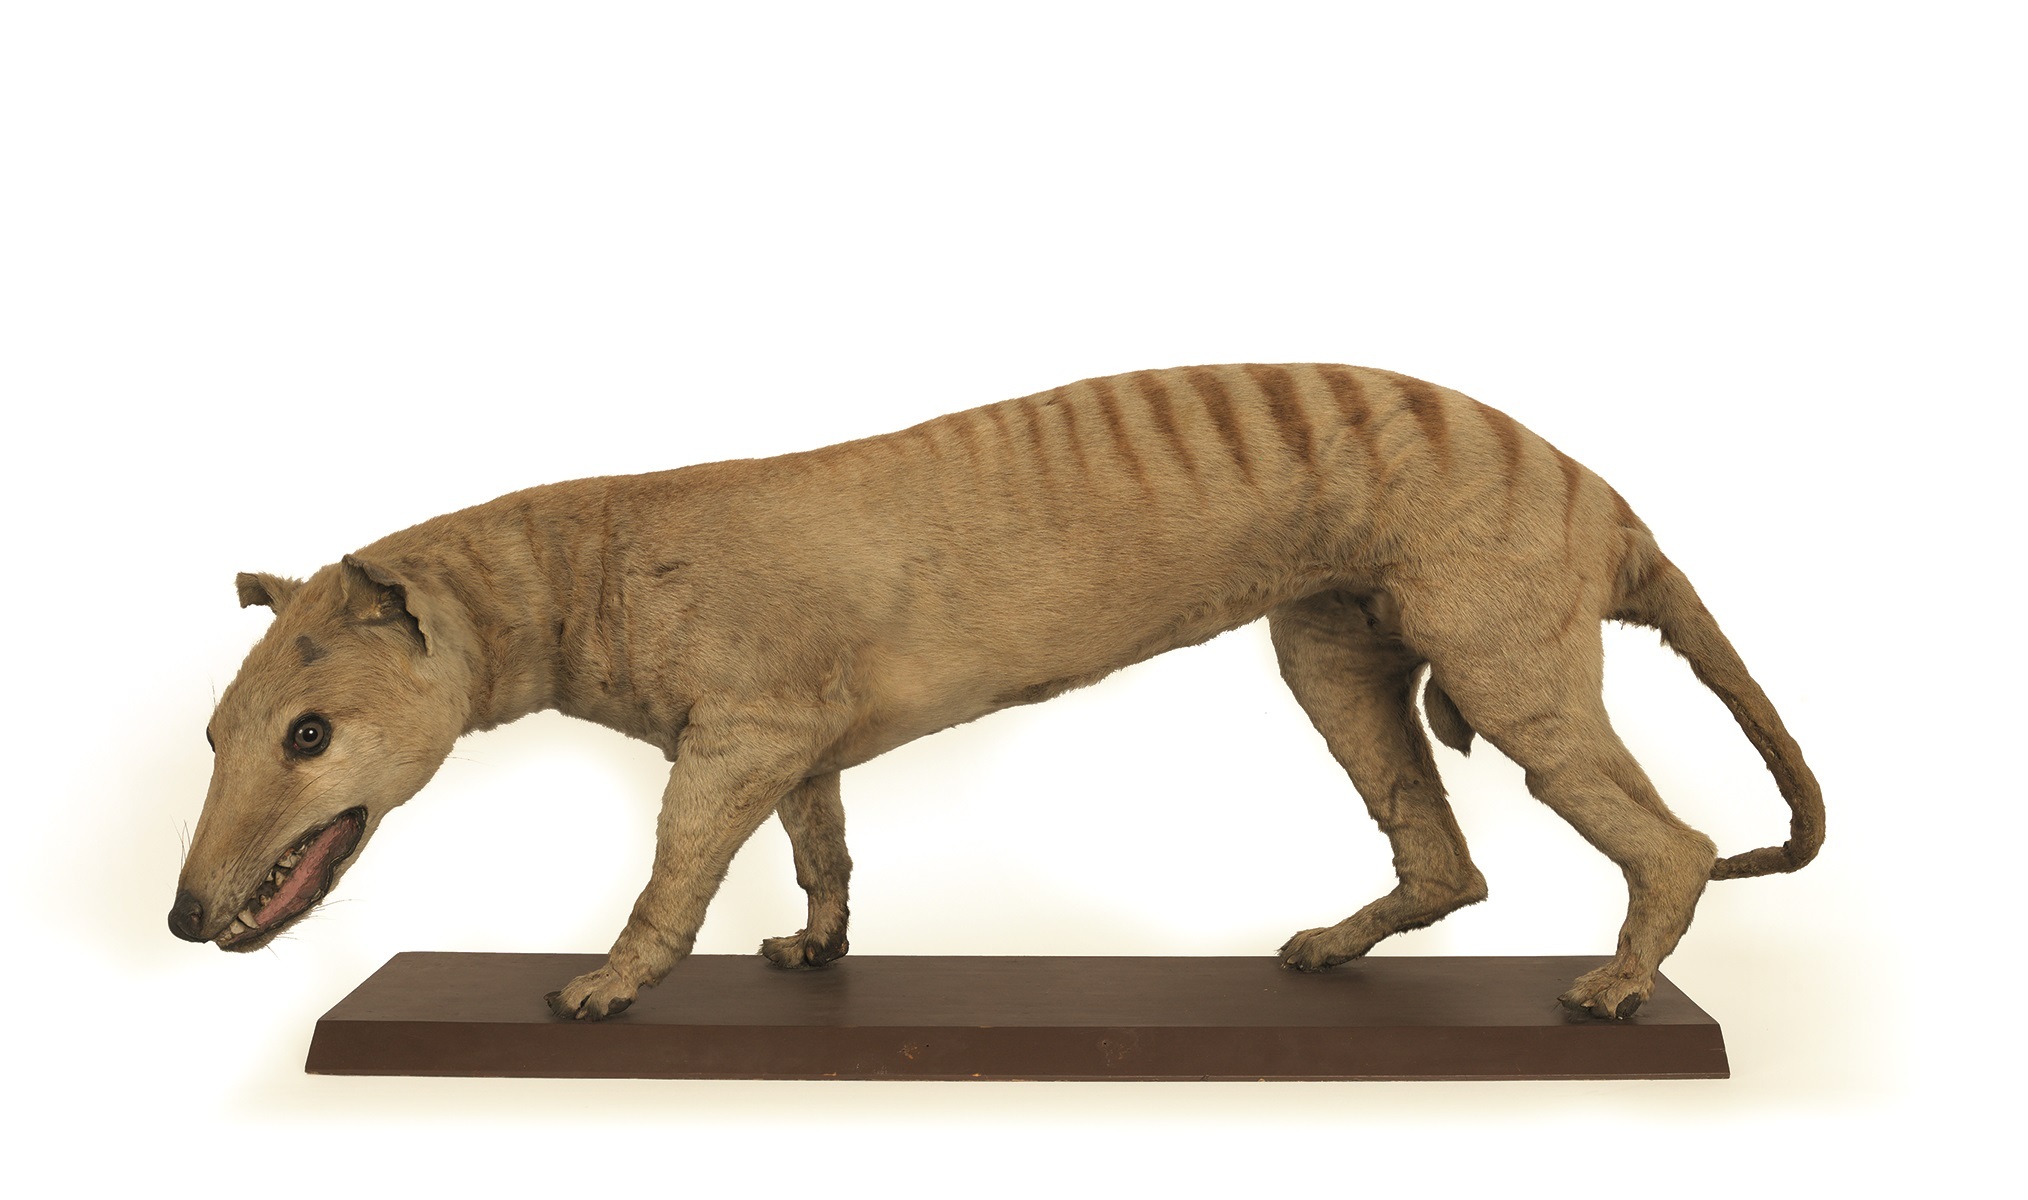 Canterbury Museum's Tasmanian tiger. Photo by Jane Ussher